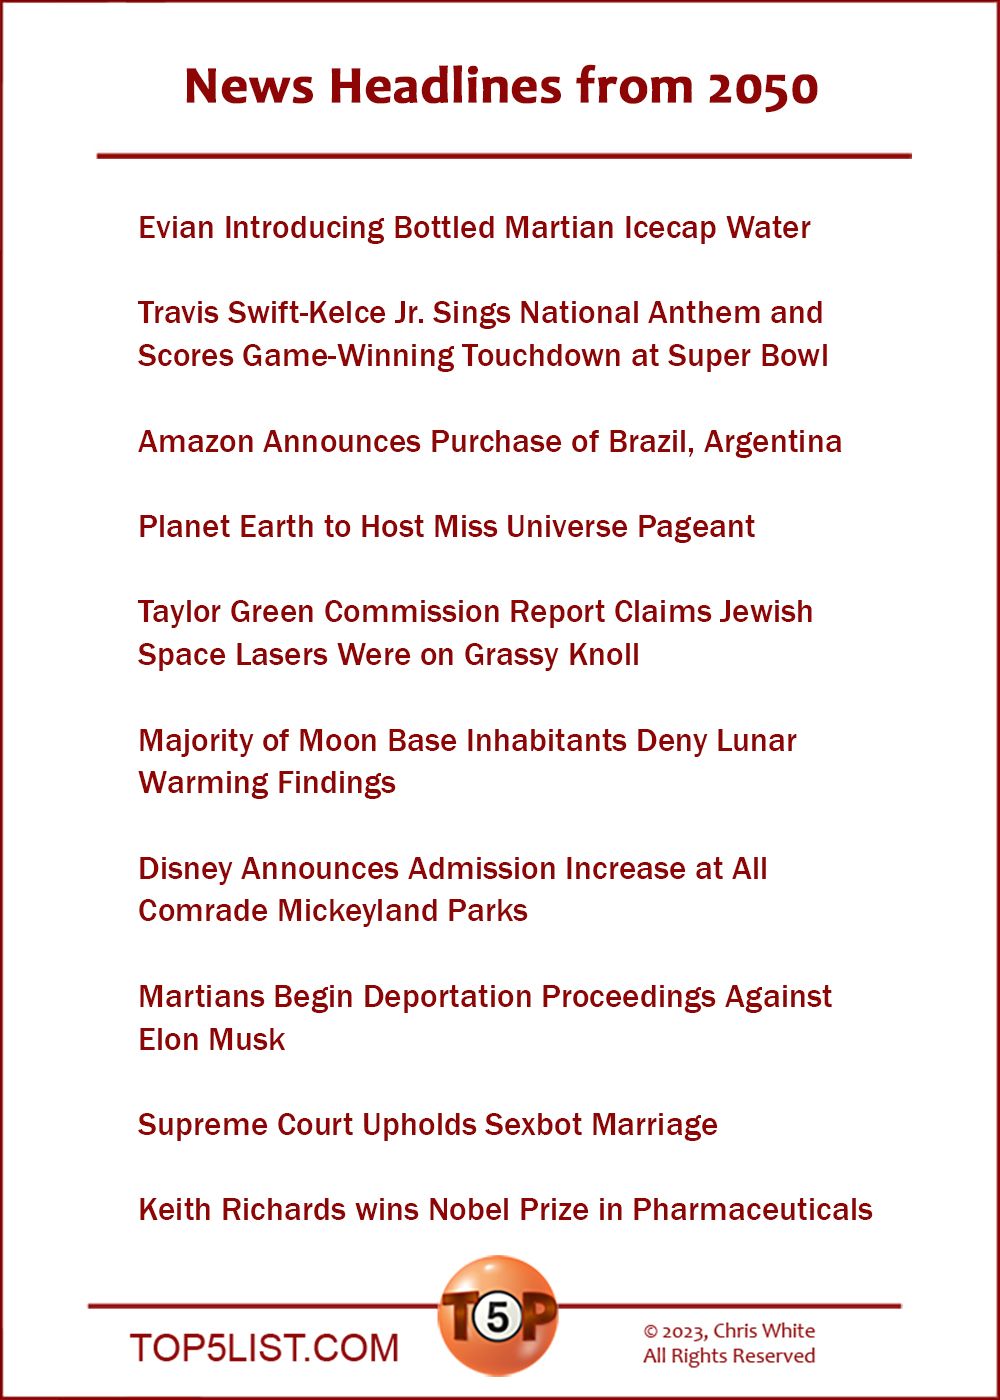 News Headlines from 2050  |   Evian Introducing Bottled Martian Icecap Water  Travis Swift-Kelce Jr. Sings National Anthem and Scores Game-Winning Touchdown at Super Bowl  Amazon Announces Purchase of Brazil, Argentina  Planet Earth to Host Miss Universe Pageant  Taylor Green Commission Report Claims Jewish Space Lasers Were on Grassy Knoll  Majority of Moon Base Inhabitants Deny Lunar Warming Findings  Disney Announces Admission Increase at All Comrade Mickeyland Parks  Martians Begin Deportation Proceedings Against Elon Musk  Supreme Court Upholds Sexbot Marriage  Keith Richards wins Nobel Prize in Pharmaceuticals